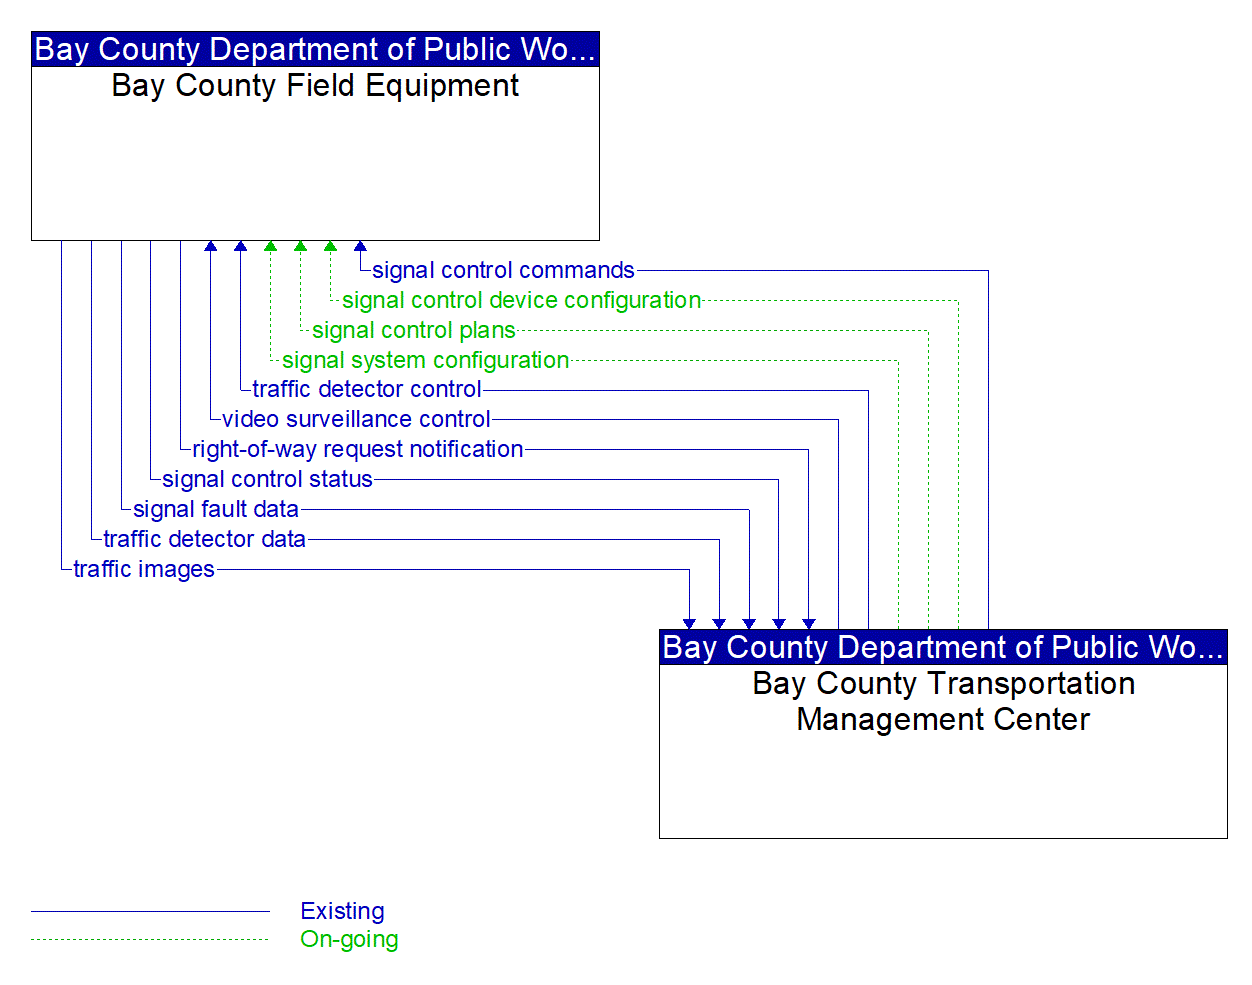 Service Graphic: Traffic Signal Control (Bay County)